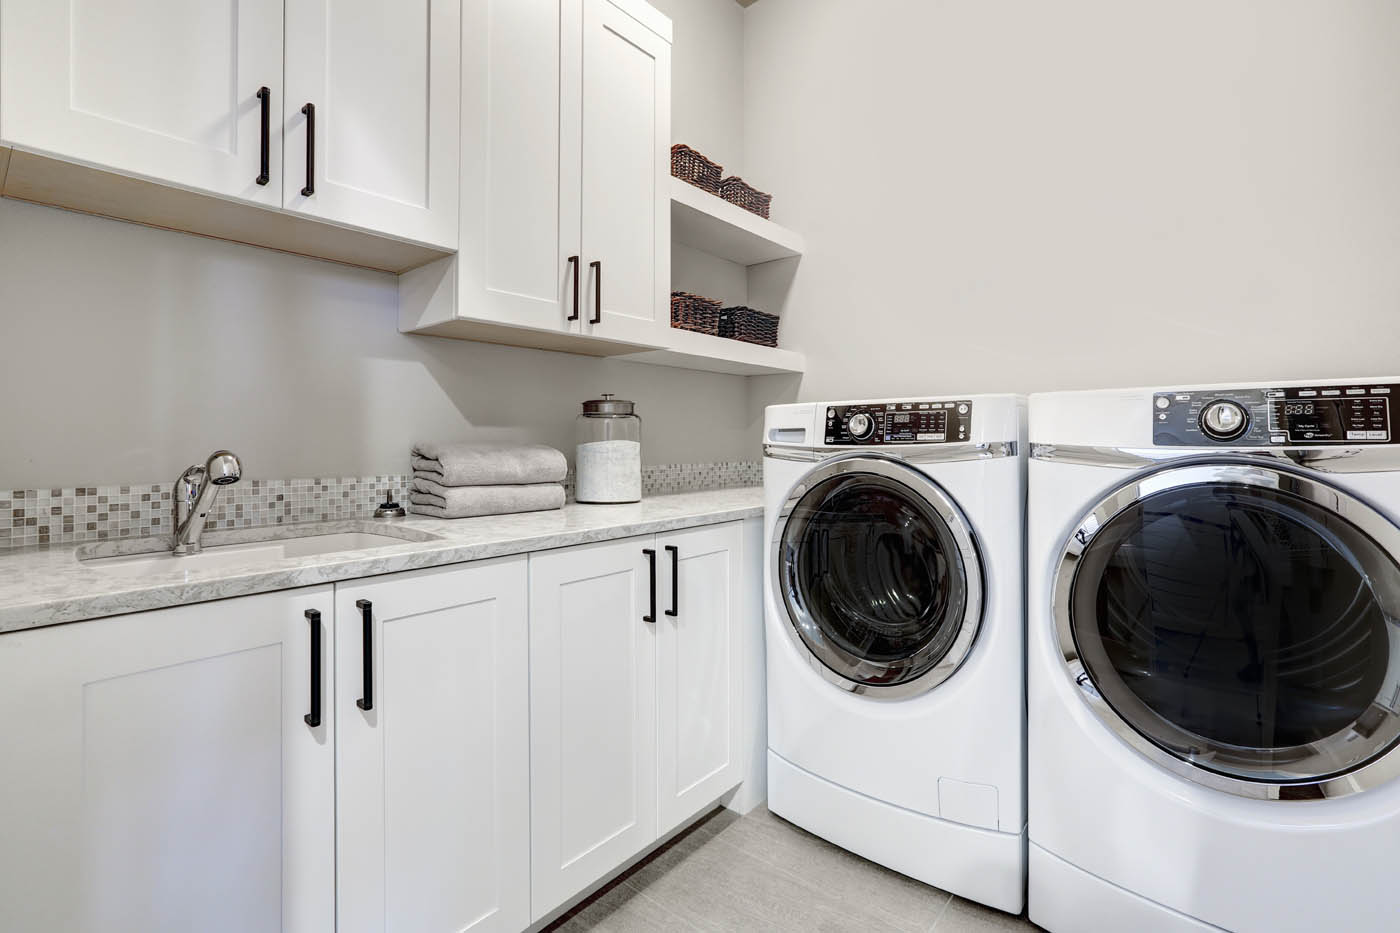 A picture of a laundry room inside a home, WyattWorks.